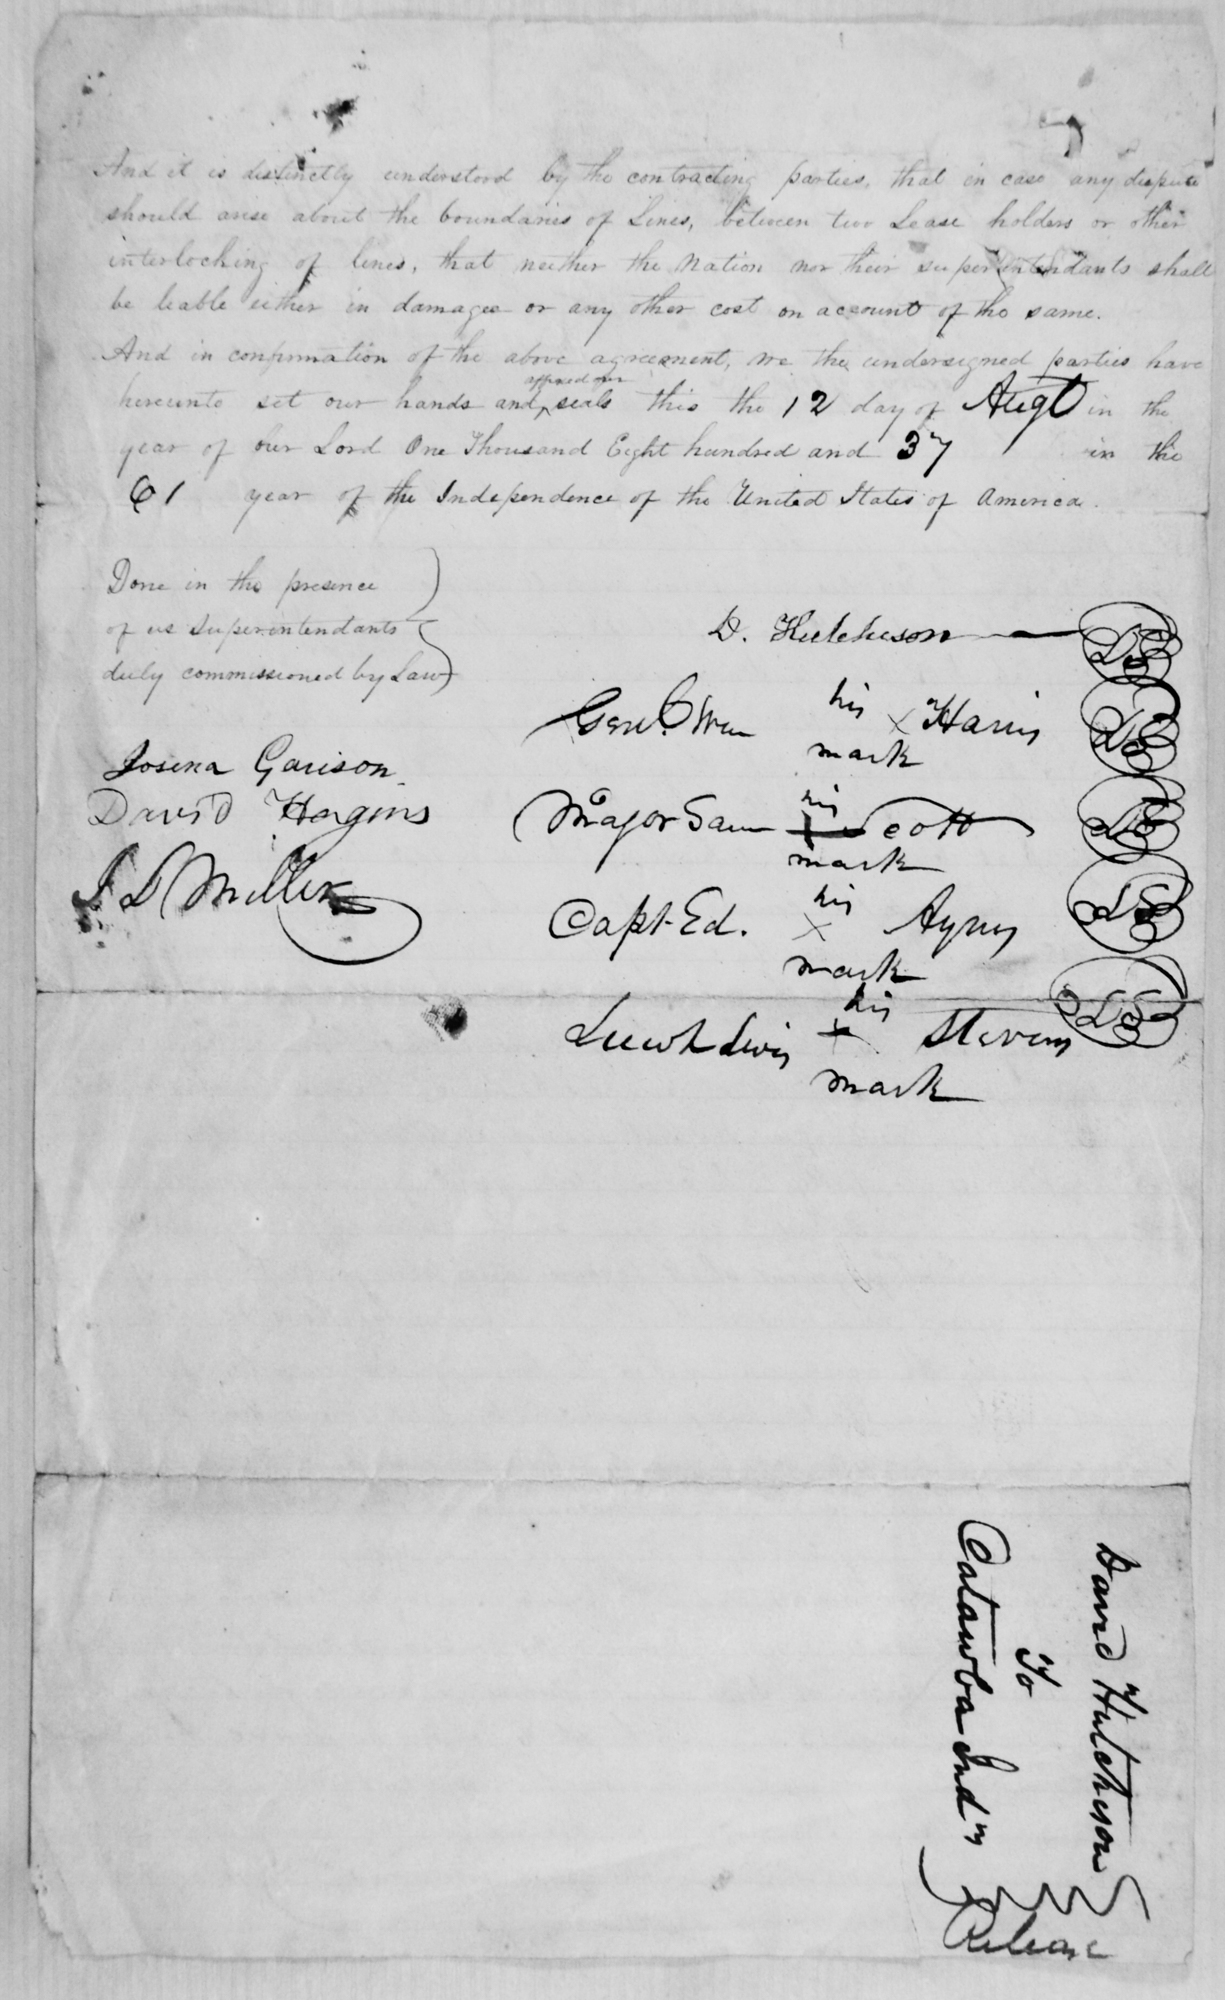 Catawba Indian Treaty to lease properties to white planters in the greater Indianland area, 1839.  Page 3,  Hutchison Group 2021.  Signatures included: General (William) Harris, Major Sam Scott, Captain Ed Ayers, Lt. (Stevens) for the Catawba Indian Tribe and David Hutchison